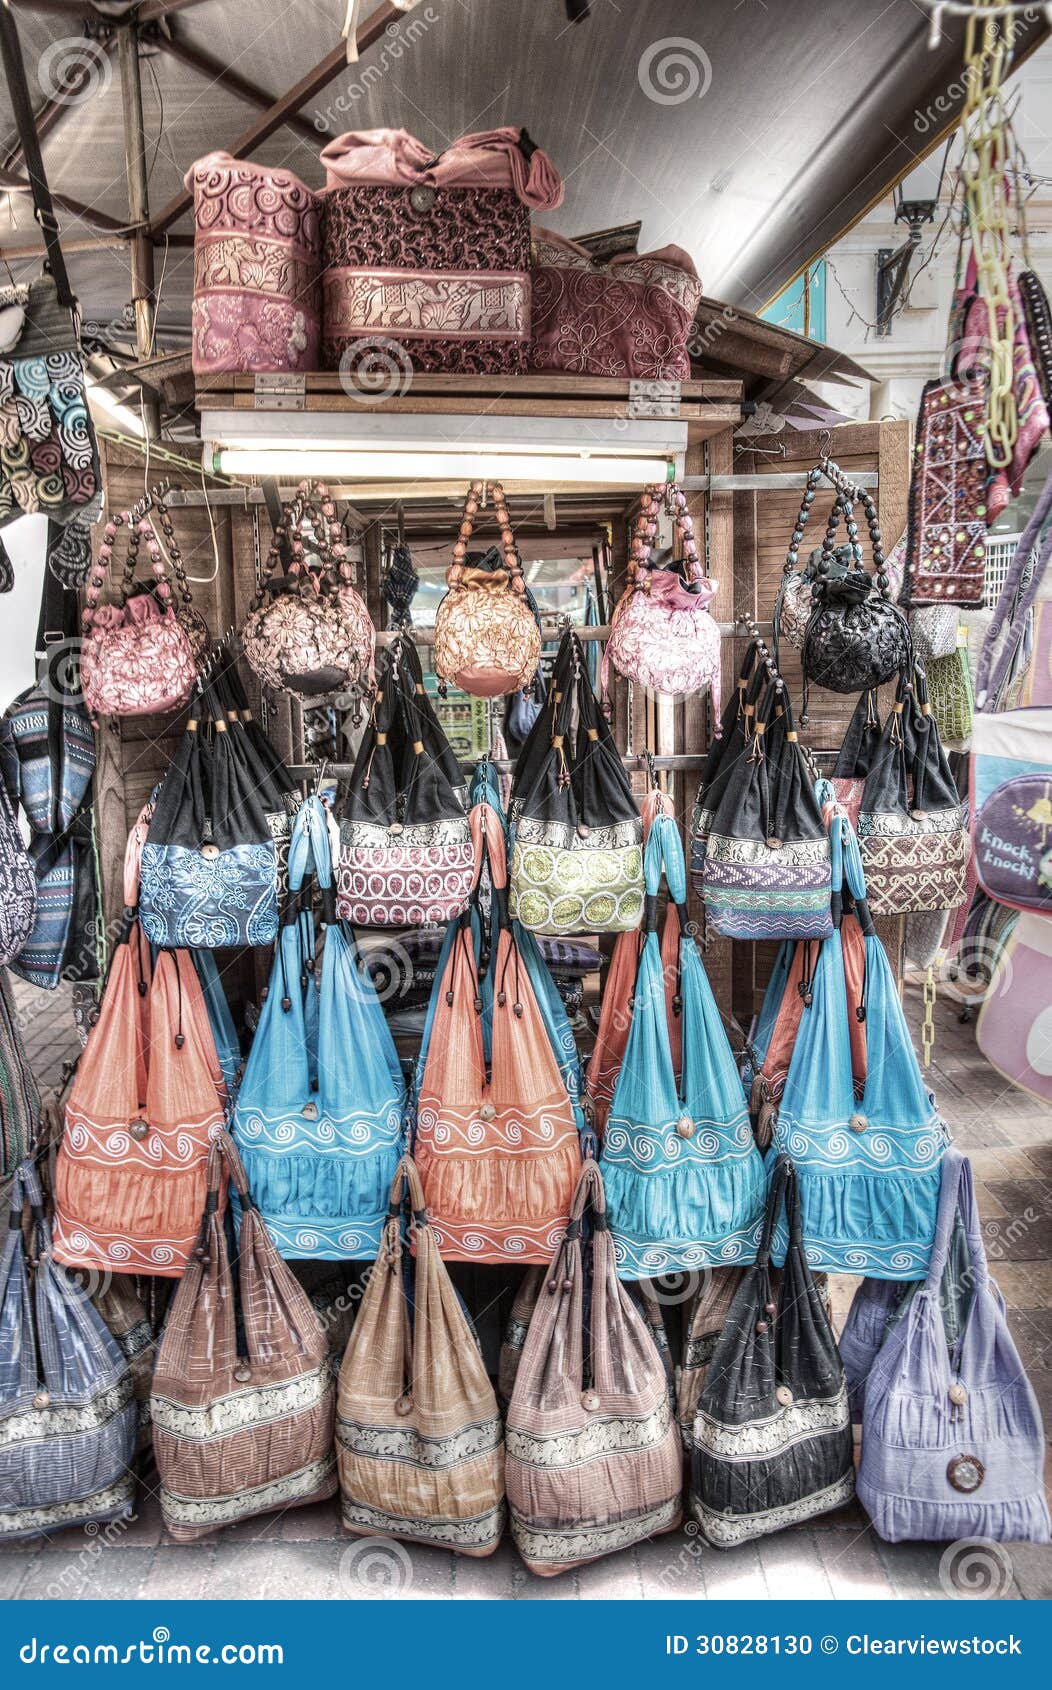 Bags for sale stock photo. Image of retail, tourism, traditional - 30828130